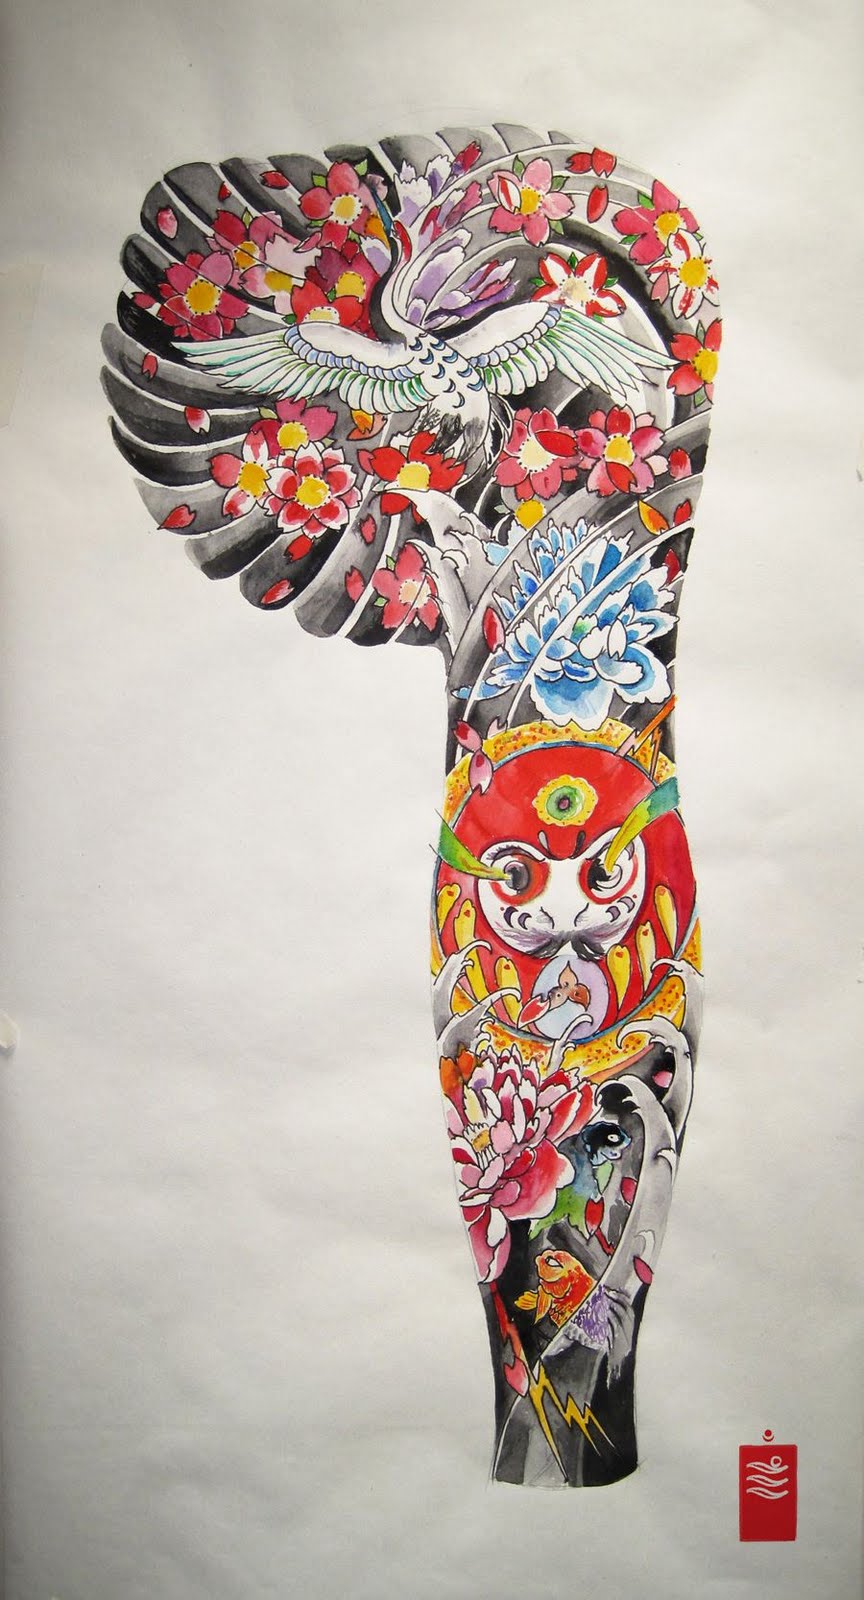 Japanese Tattoo Design Gallery | Tattoo Picture, Photos and Design Gallery